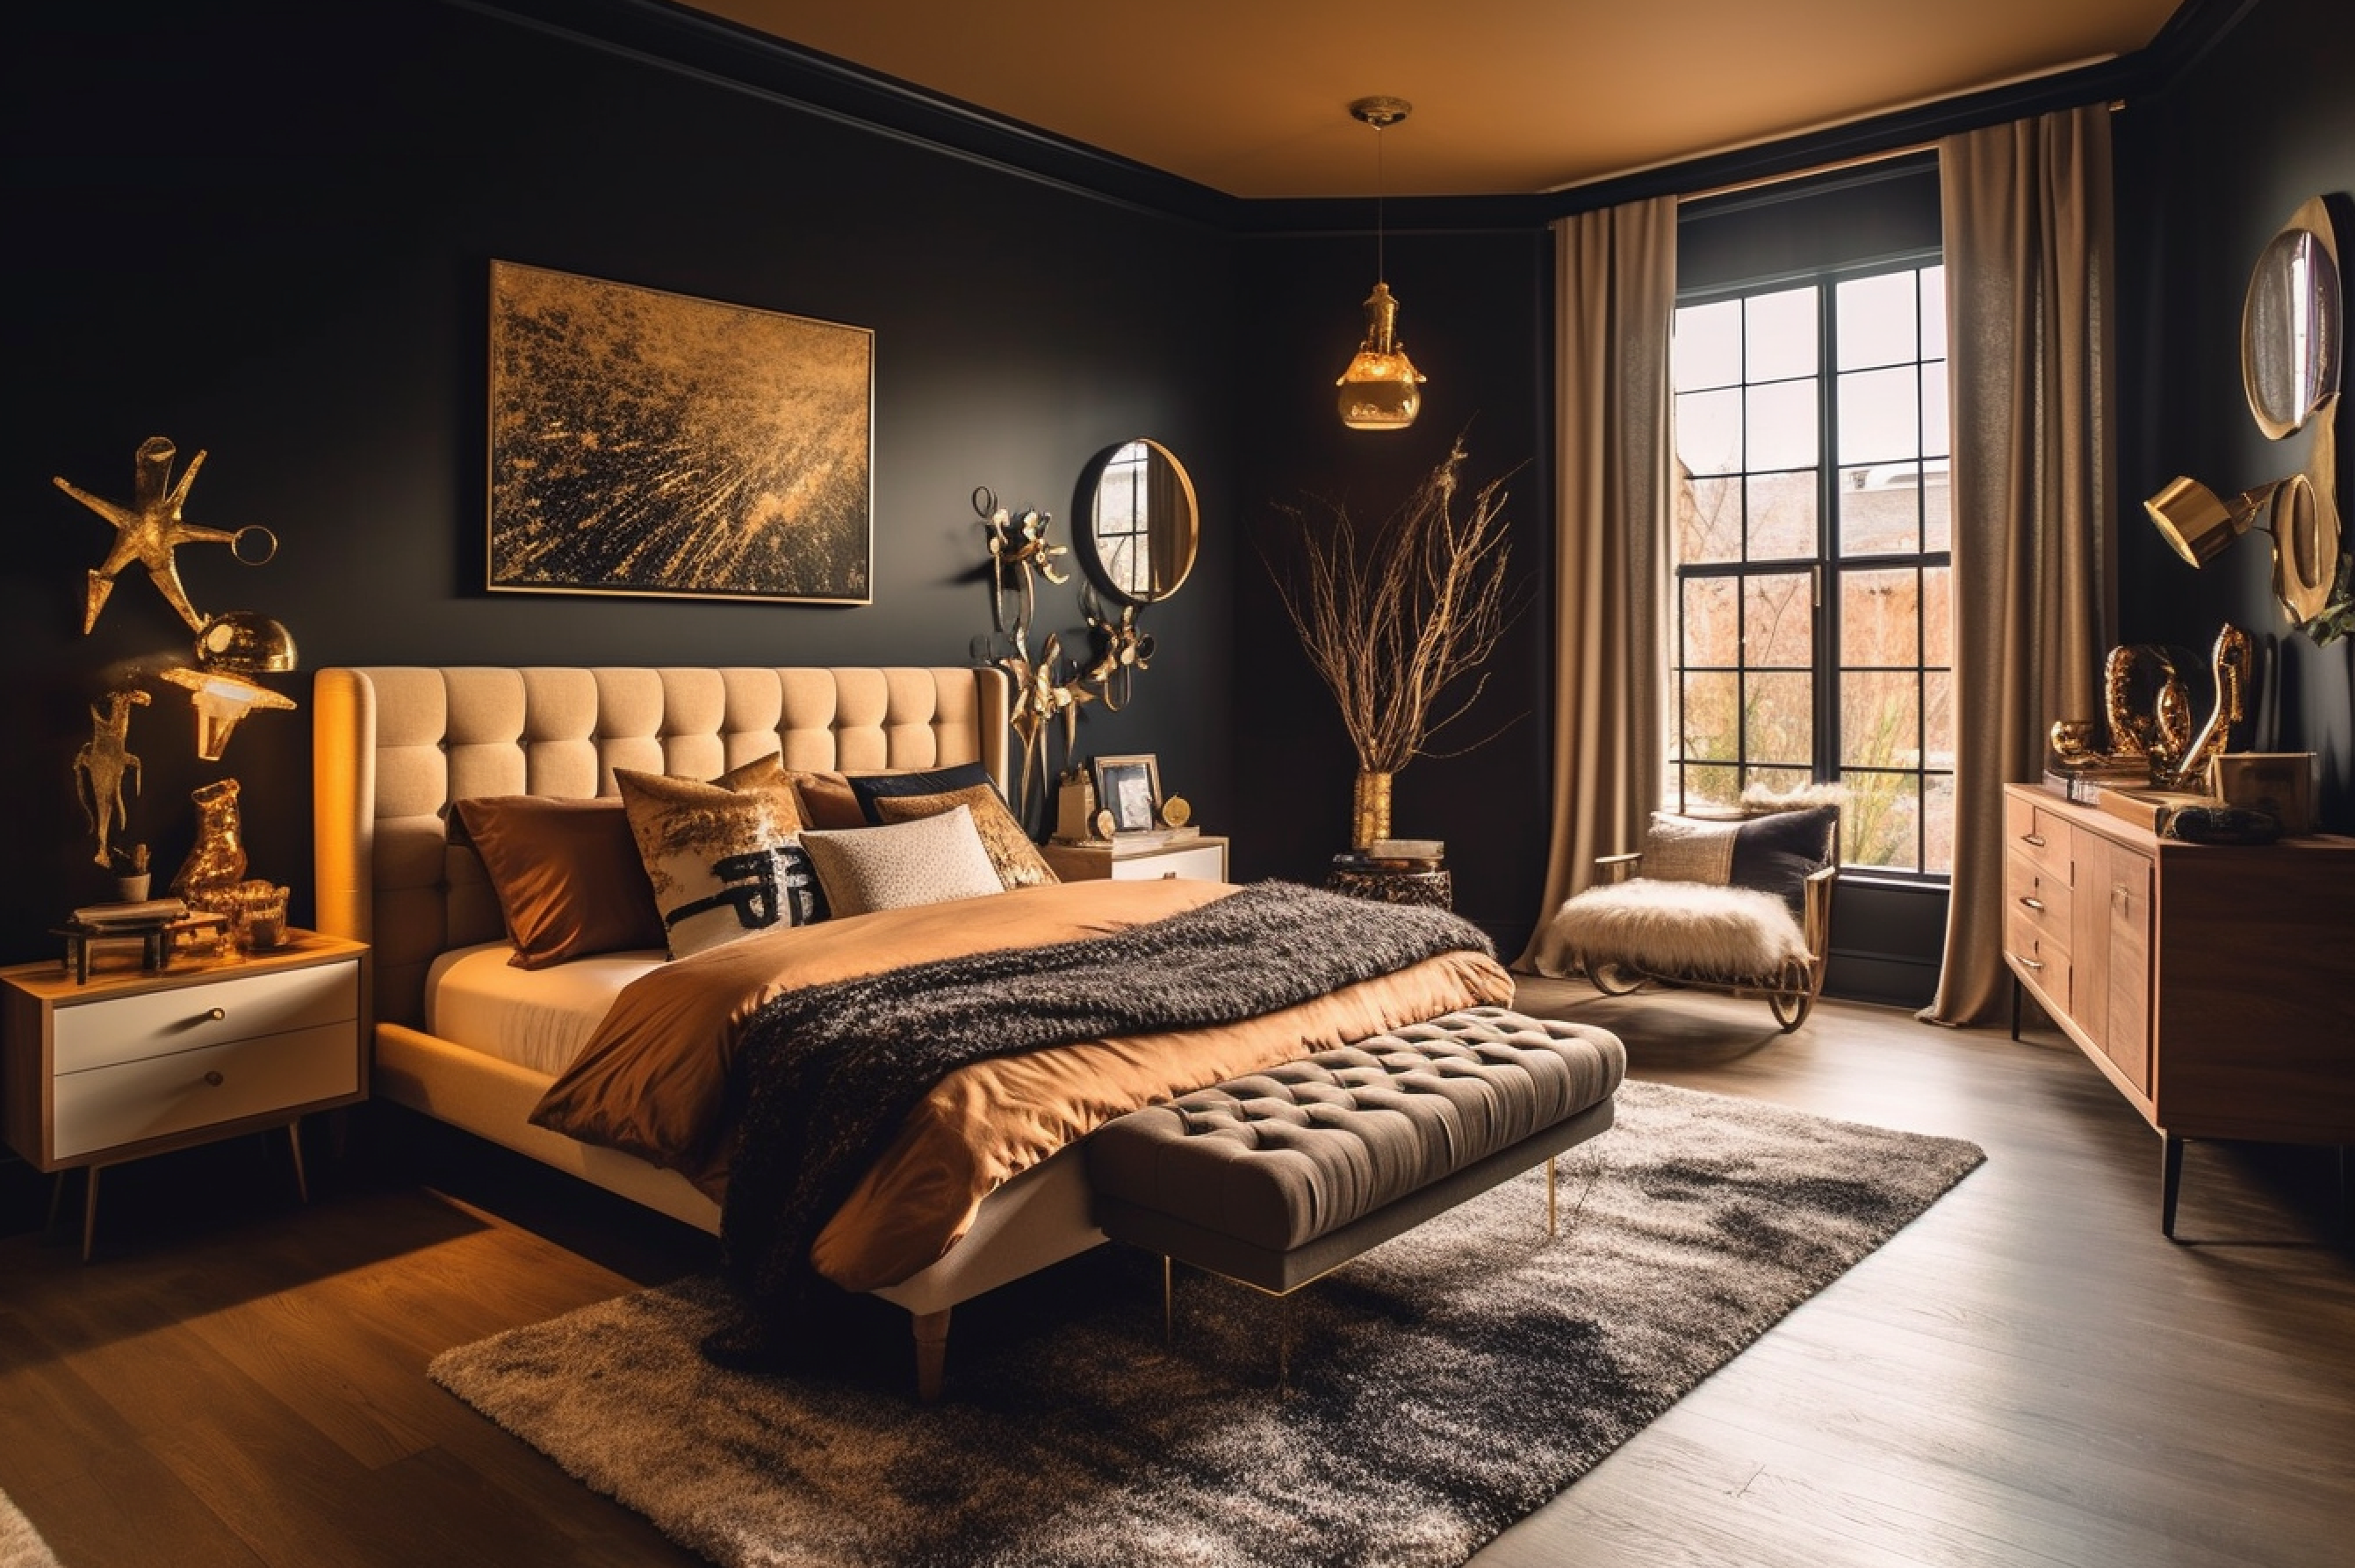 Snapshot of a chic bedroom featuring a golden brown upholstered bed against black tie painted walls.